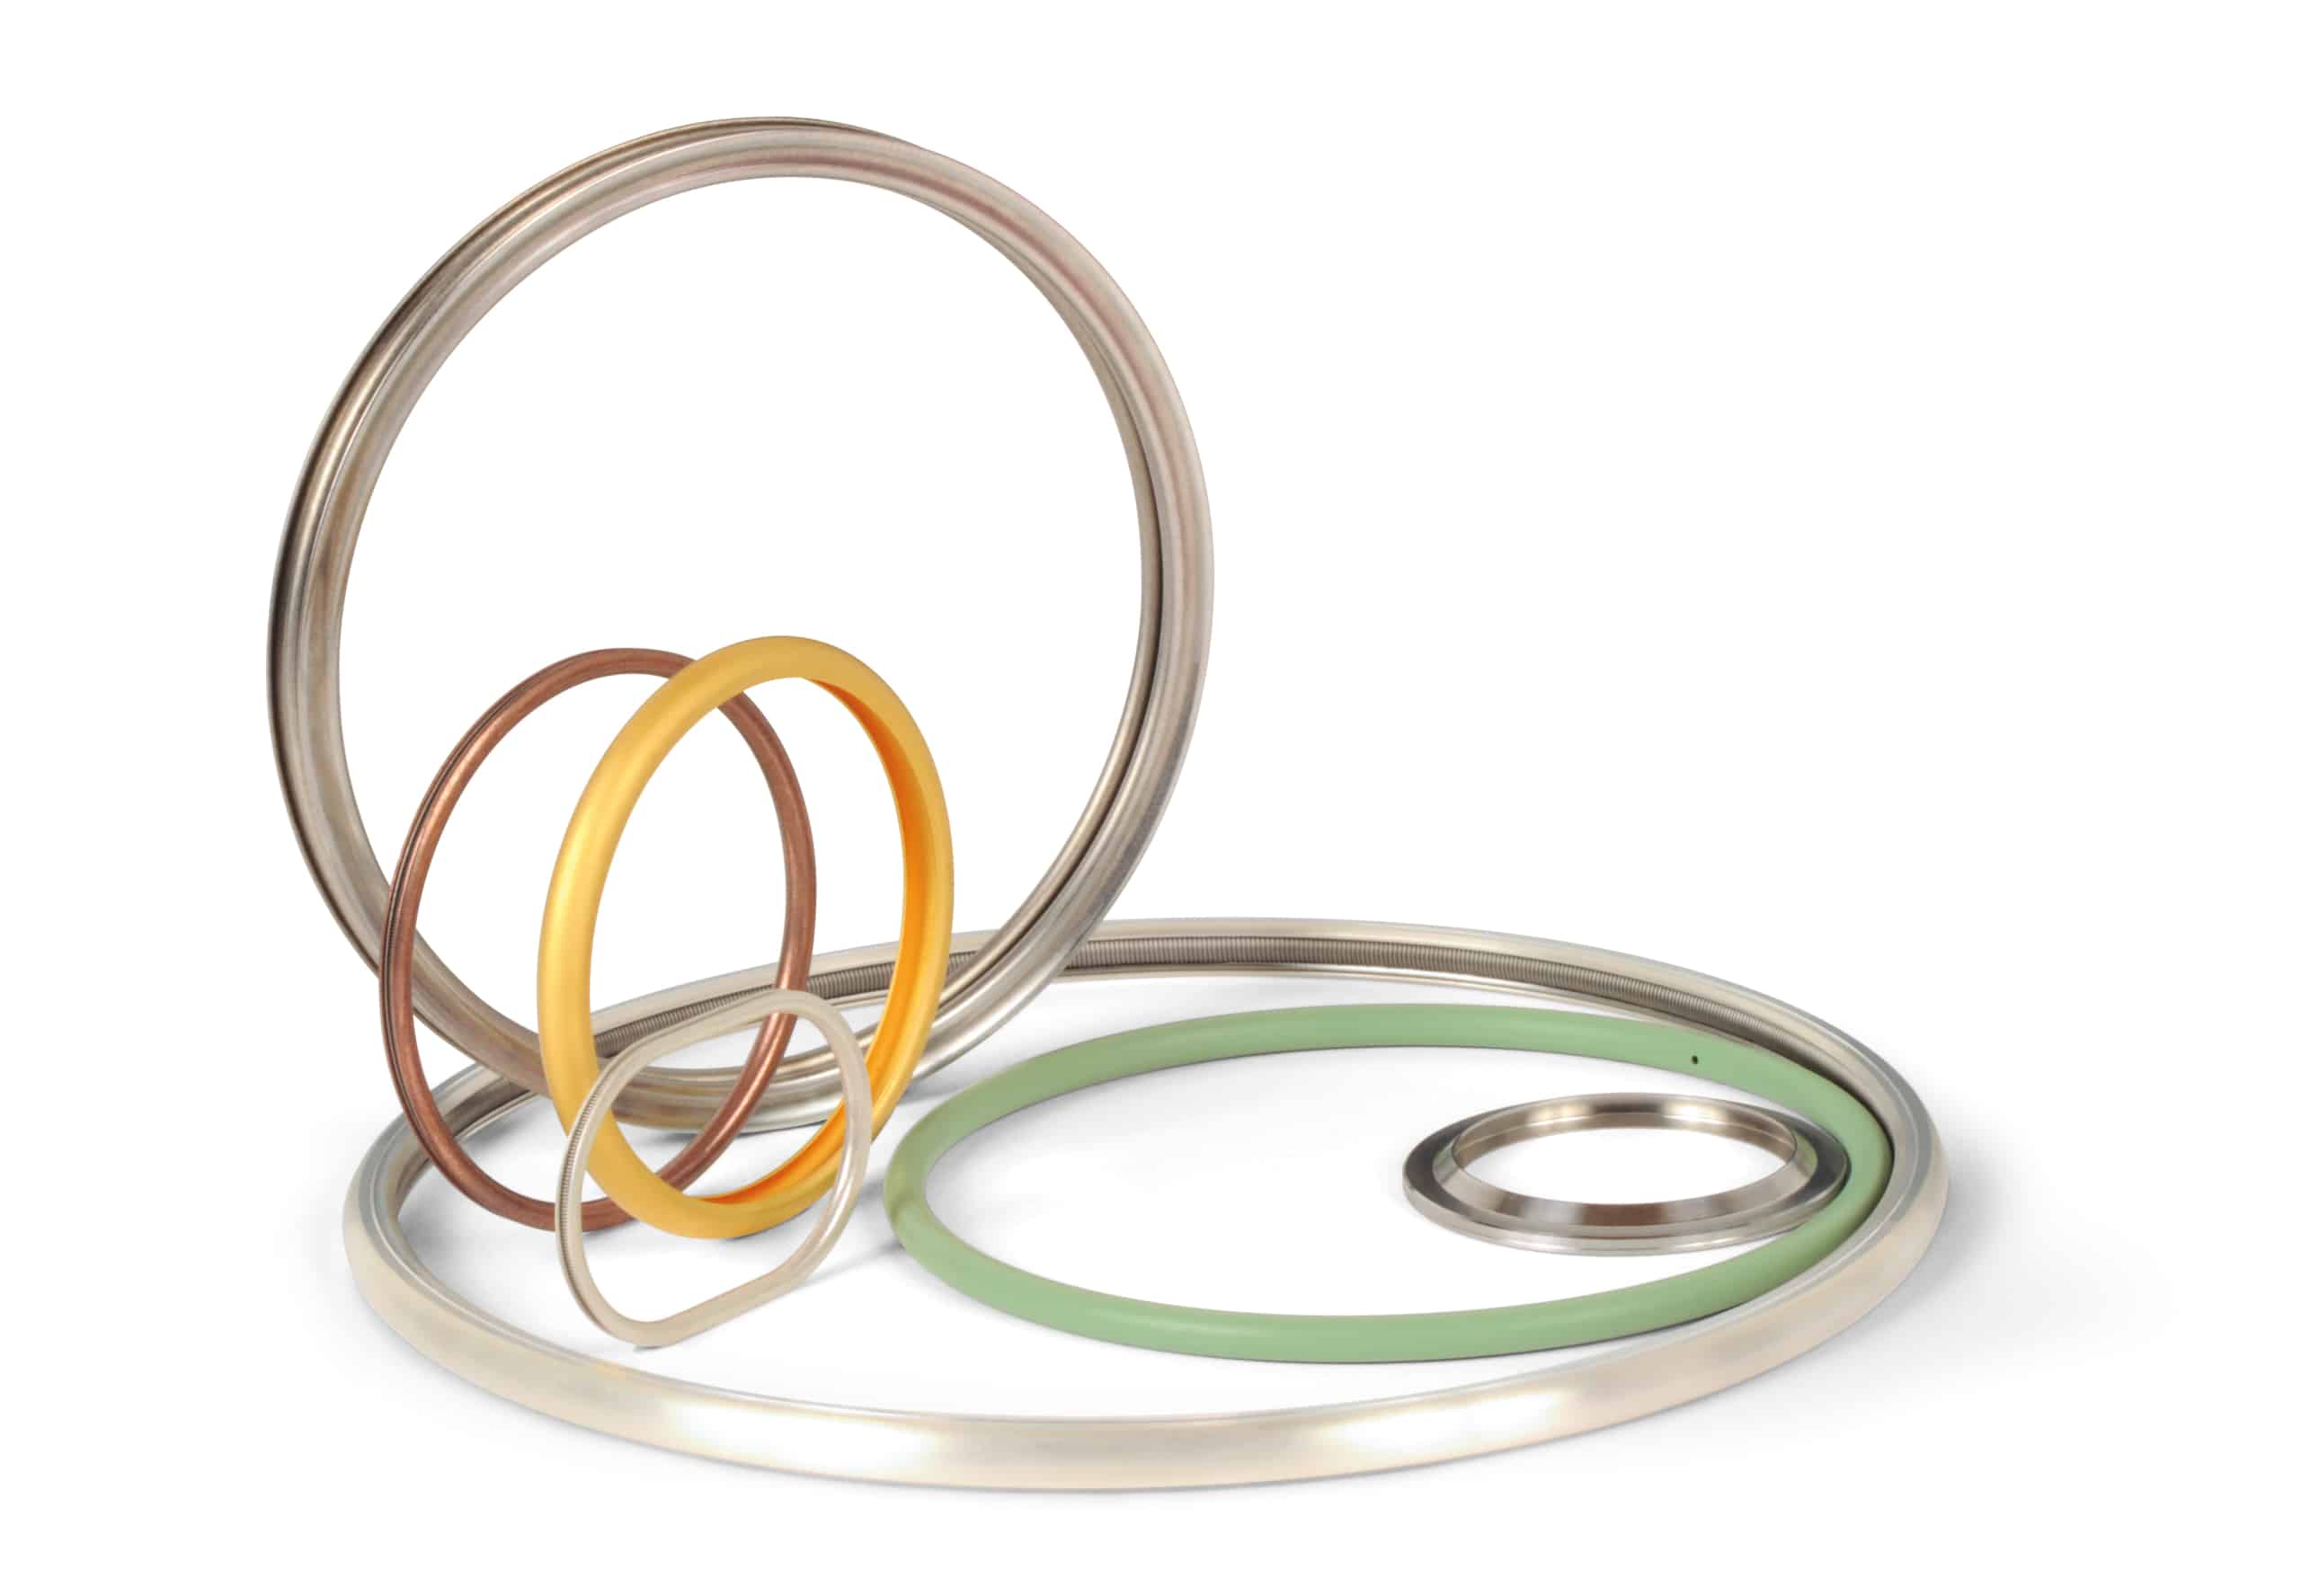 We Offer High-Quality Metal Backed Seal Rings - ROC Carbon